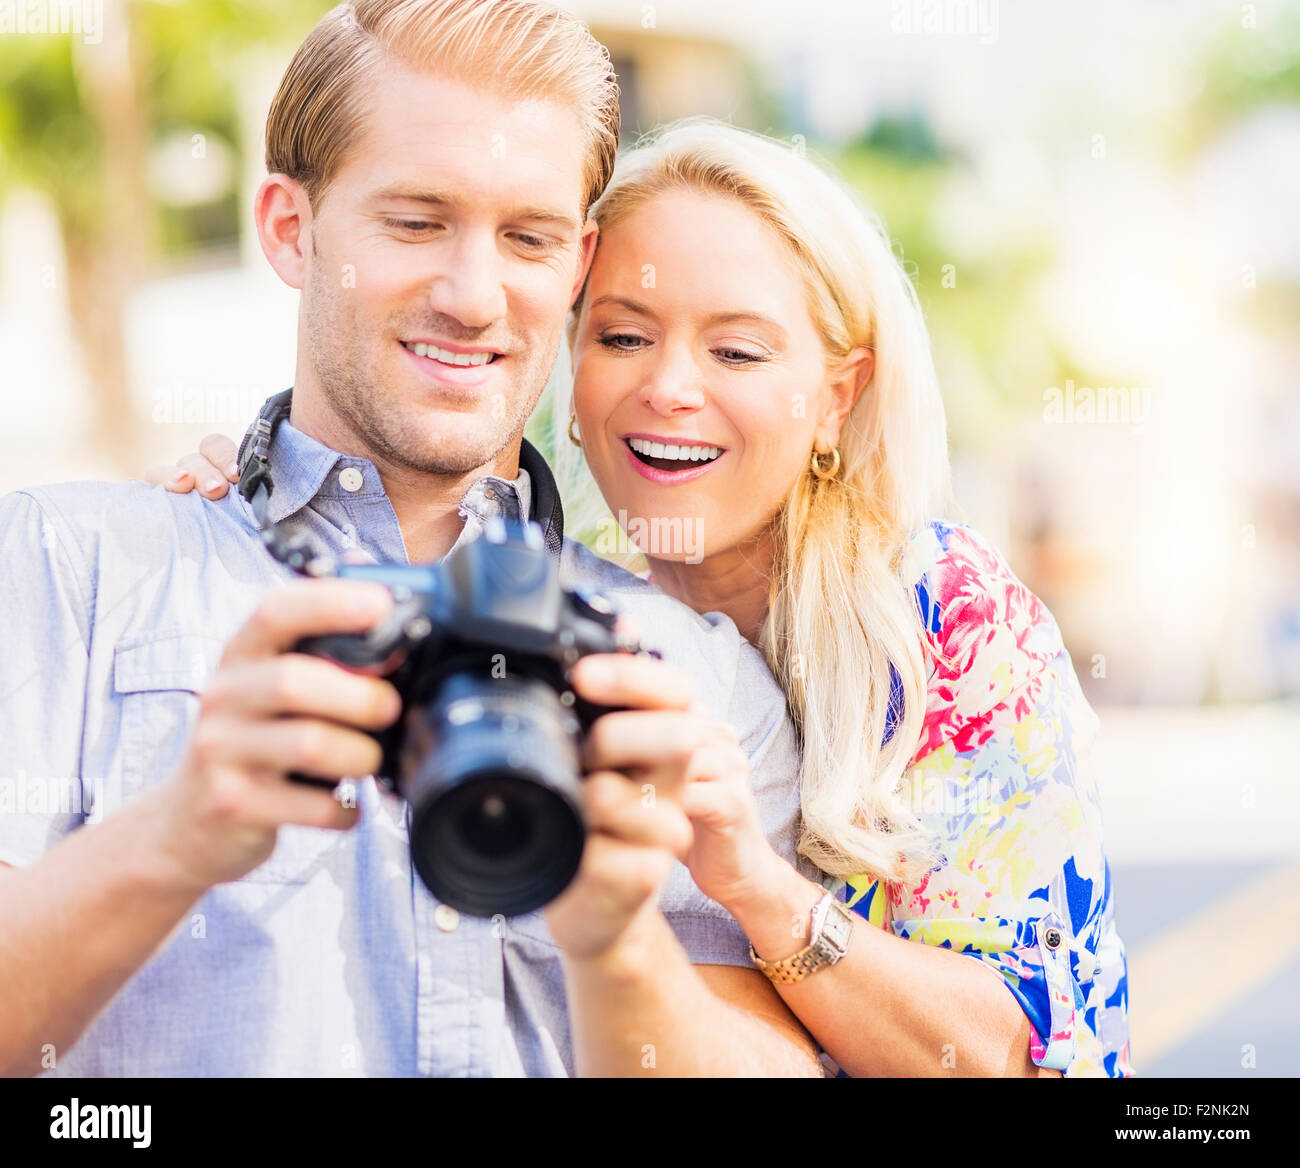 Caucasian couple reviewing digital photographs on camera Stock Photo